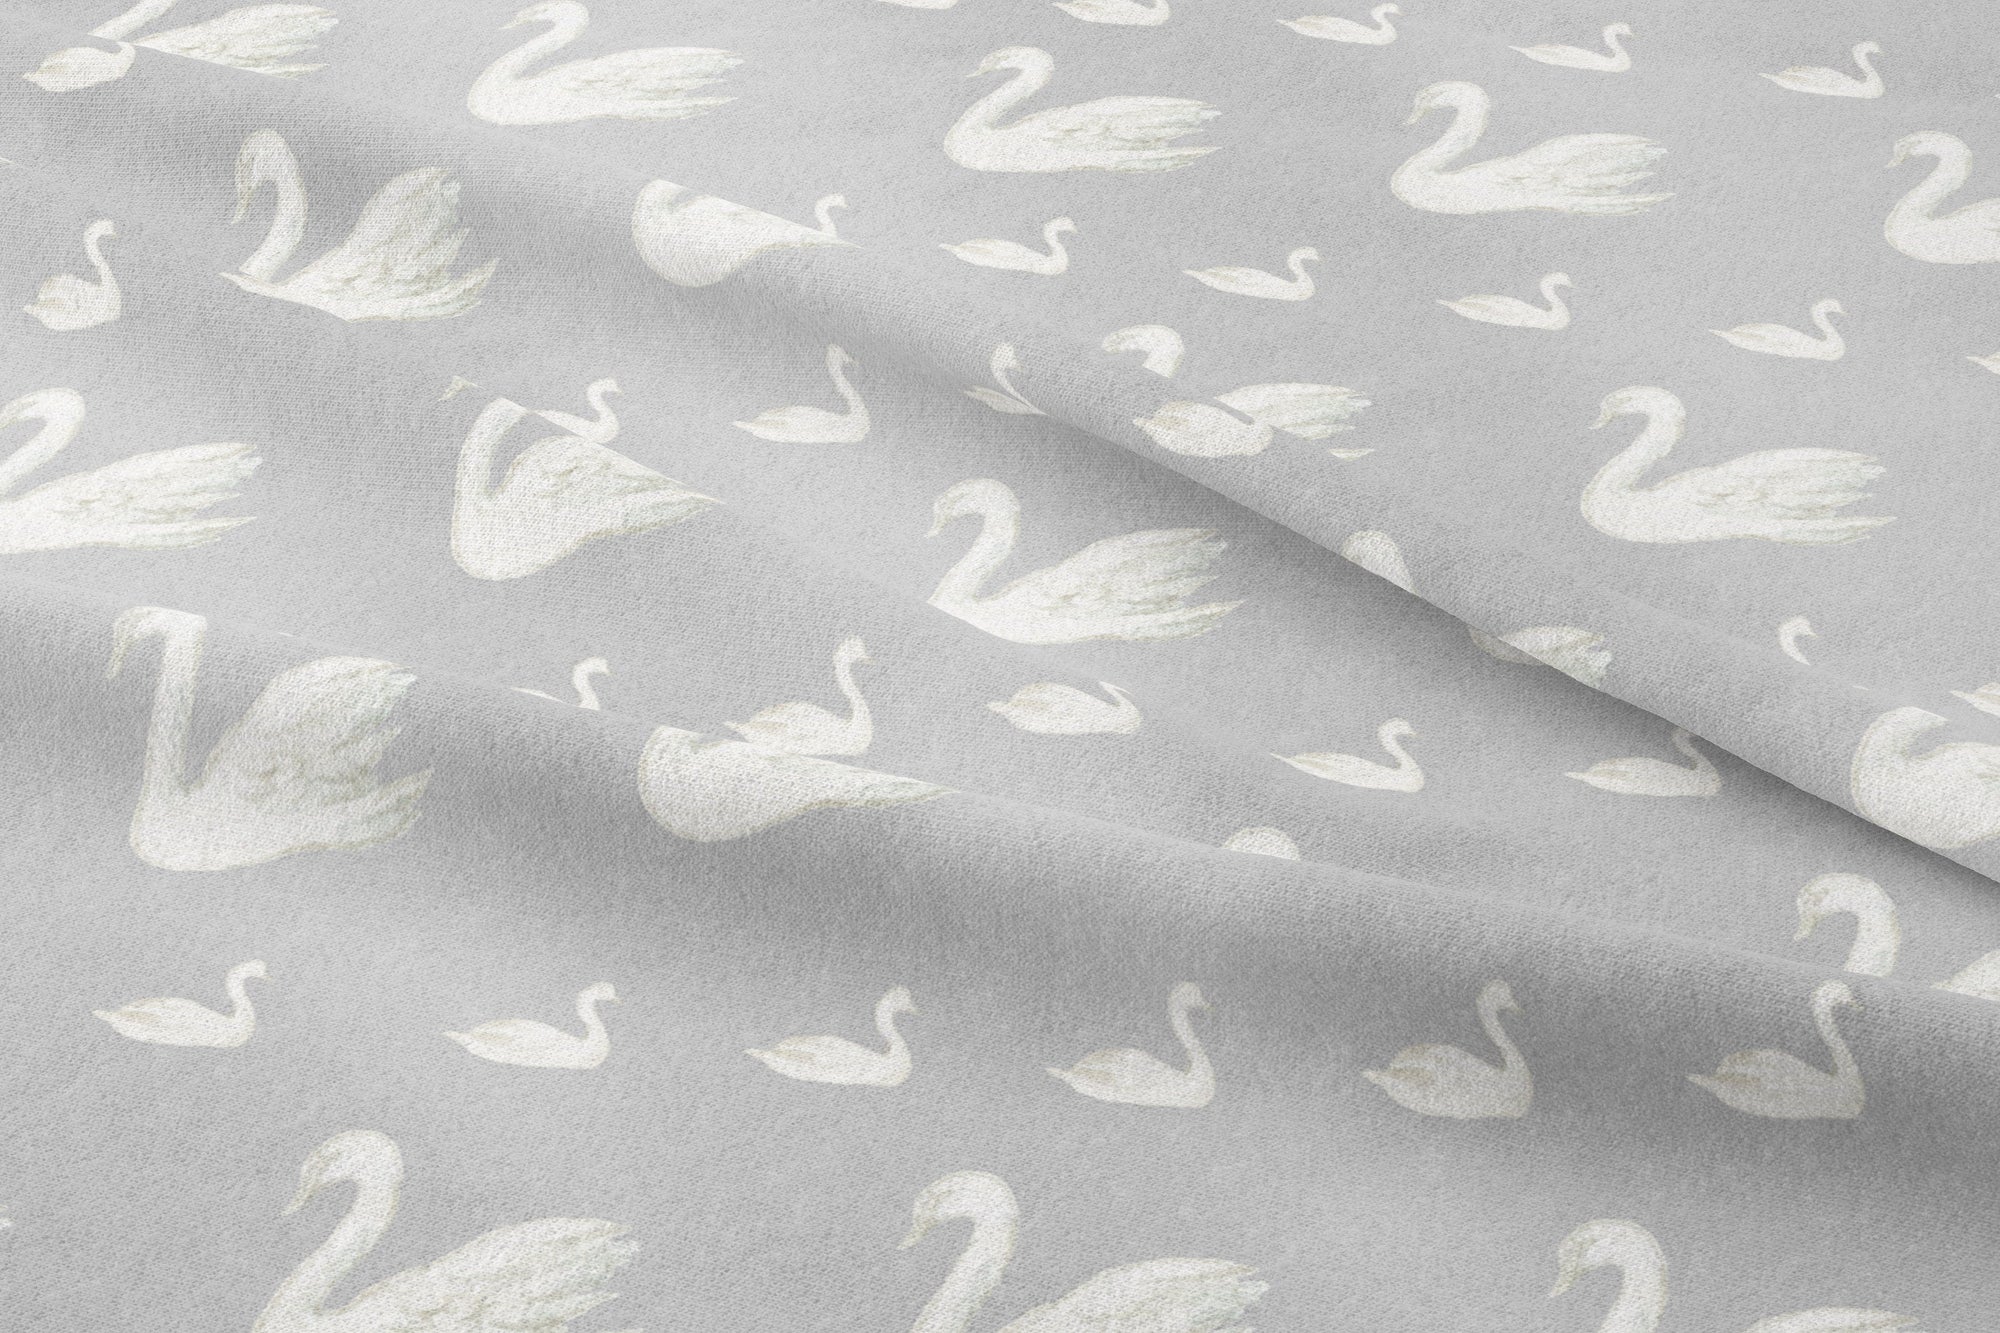 boo and rook, nursery decor and baby bedding for the modern mom, swan lake crib sheet and baby blanket, swan lake baby girl nursery decor